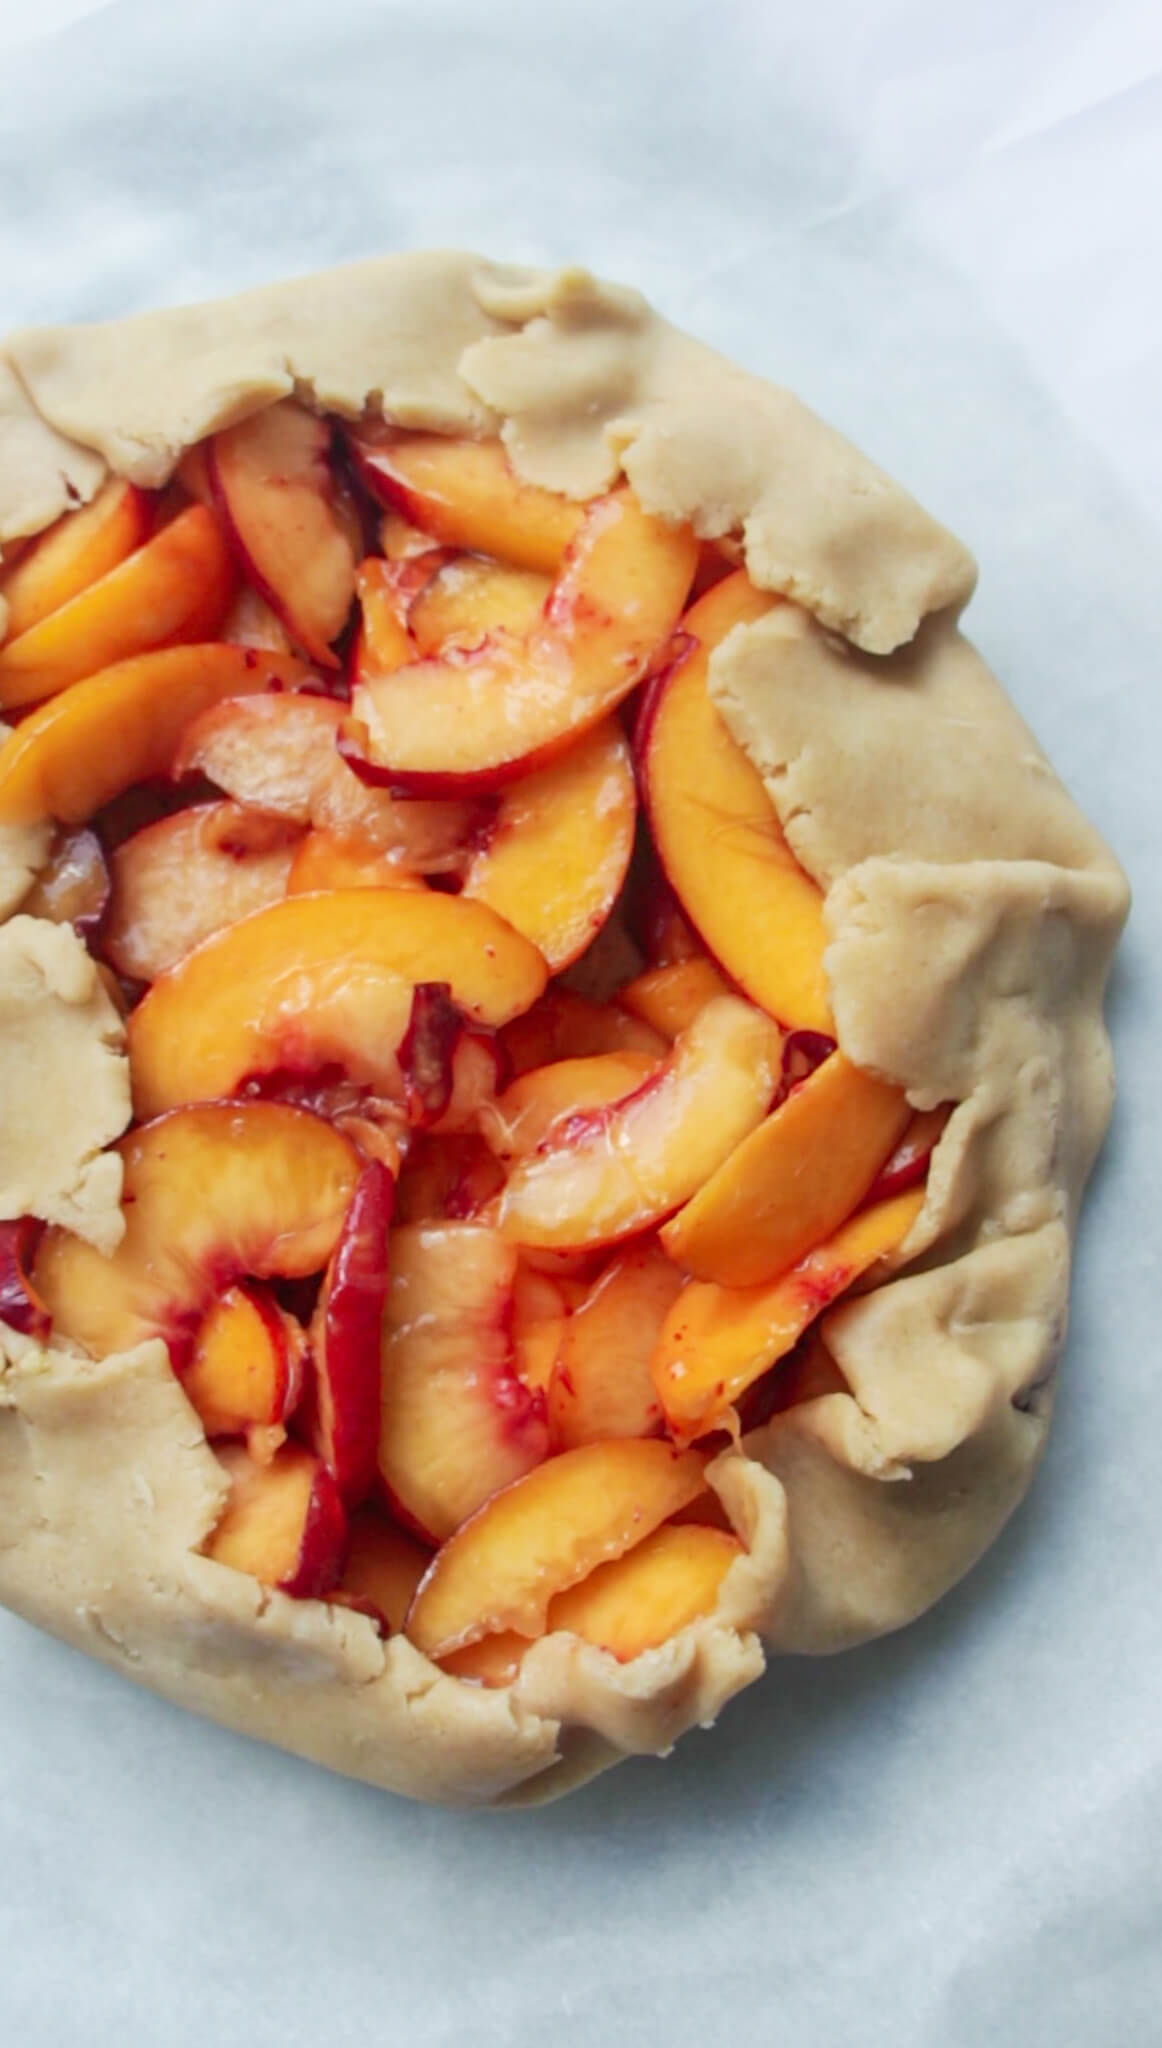 Peach almond galette on baking paper ready to be baked.